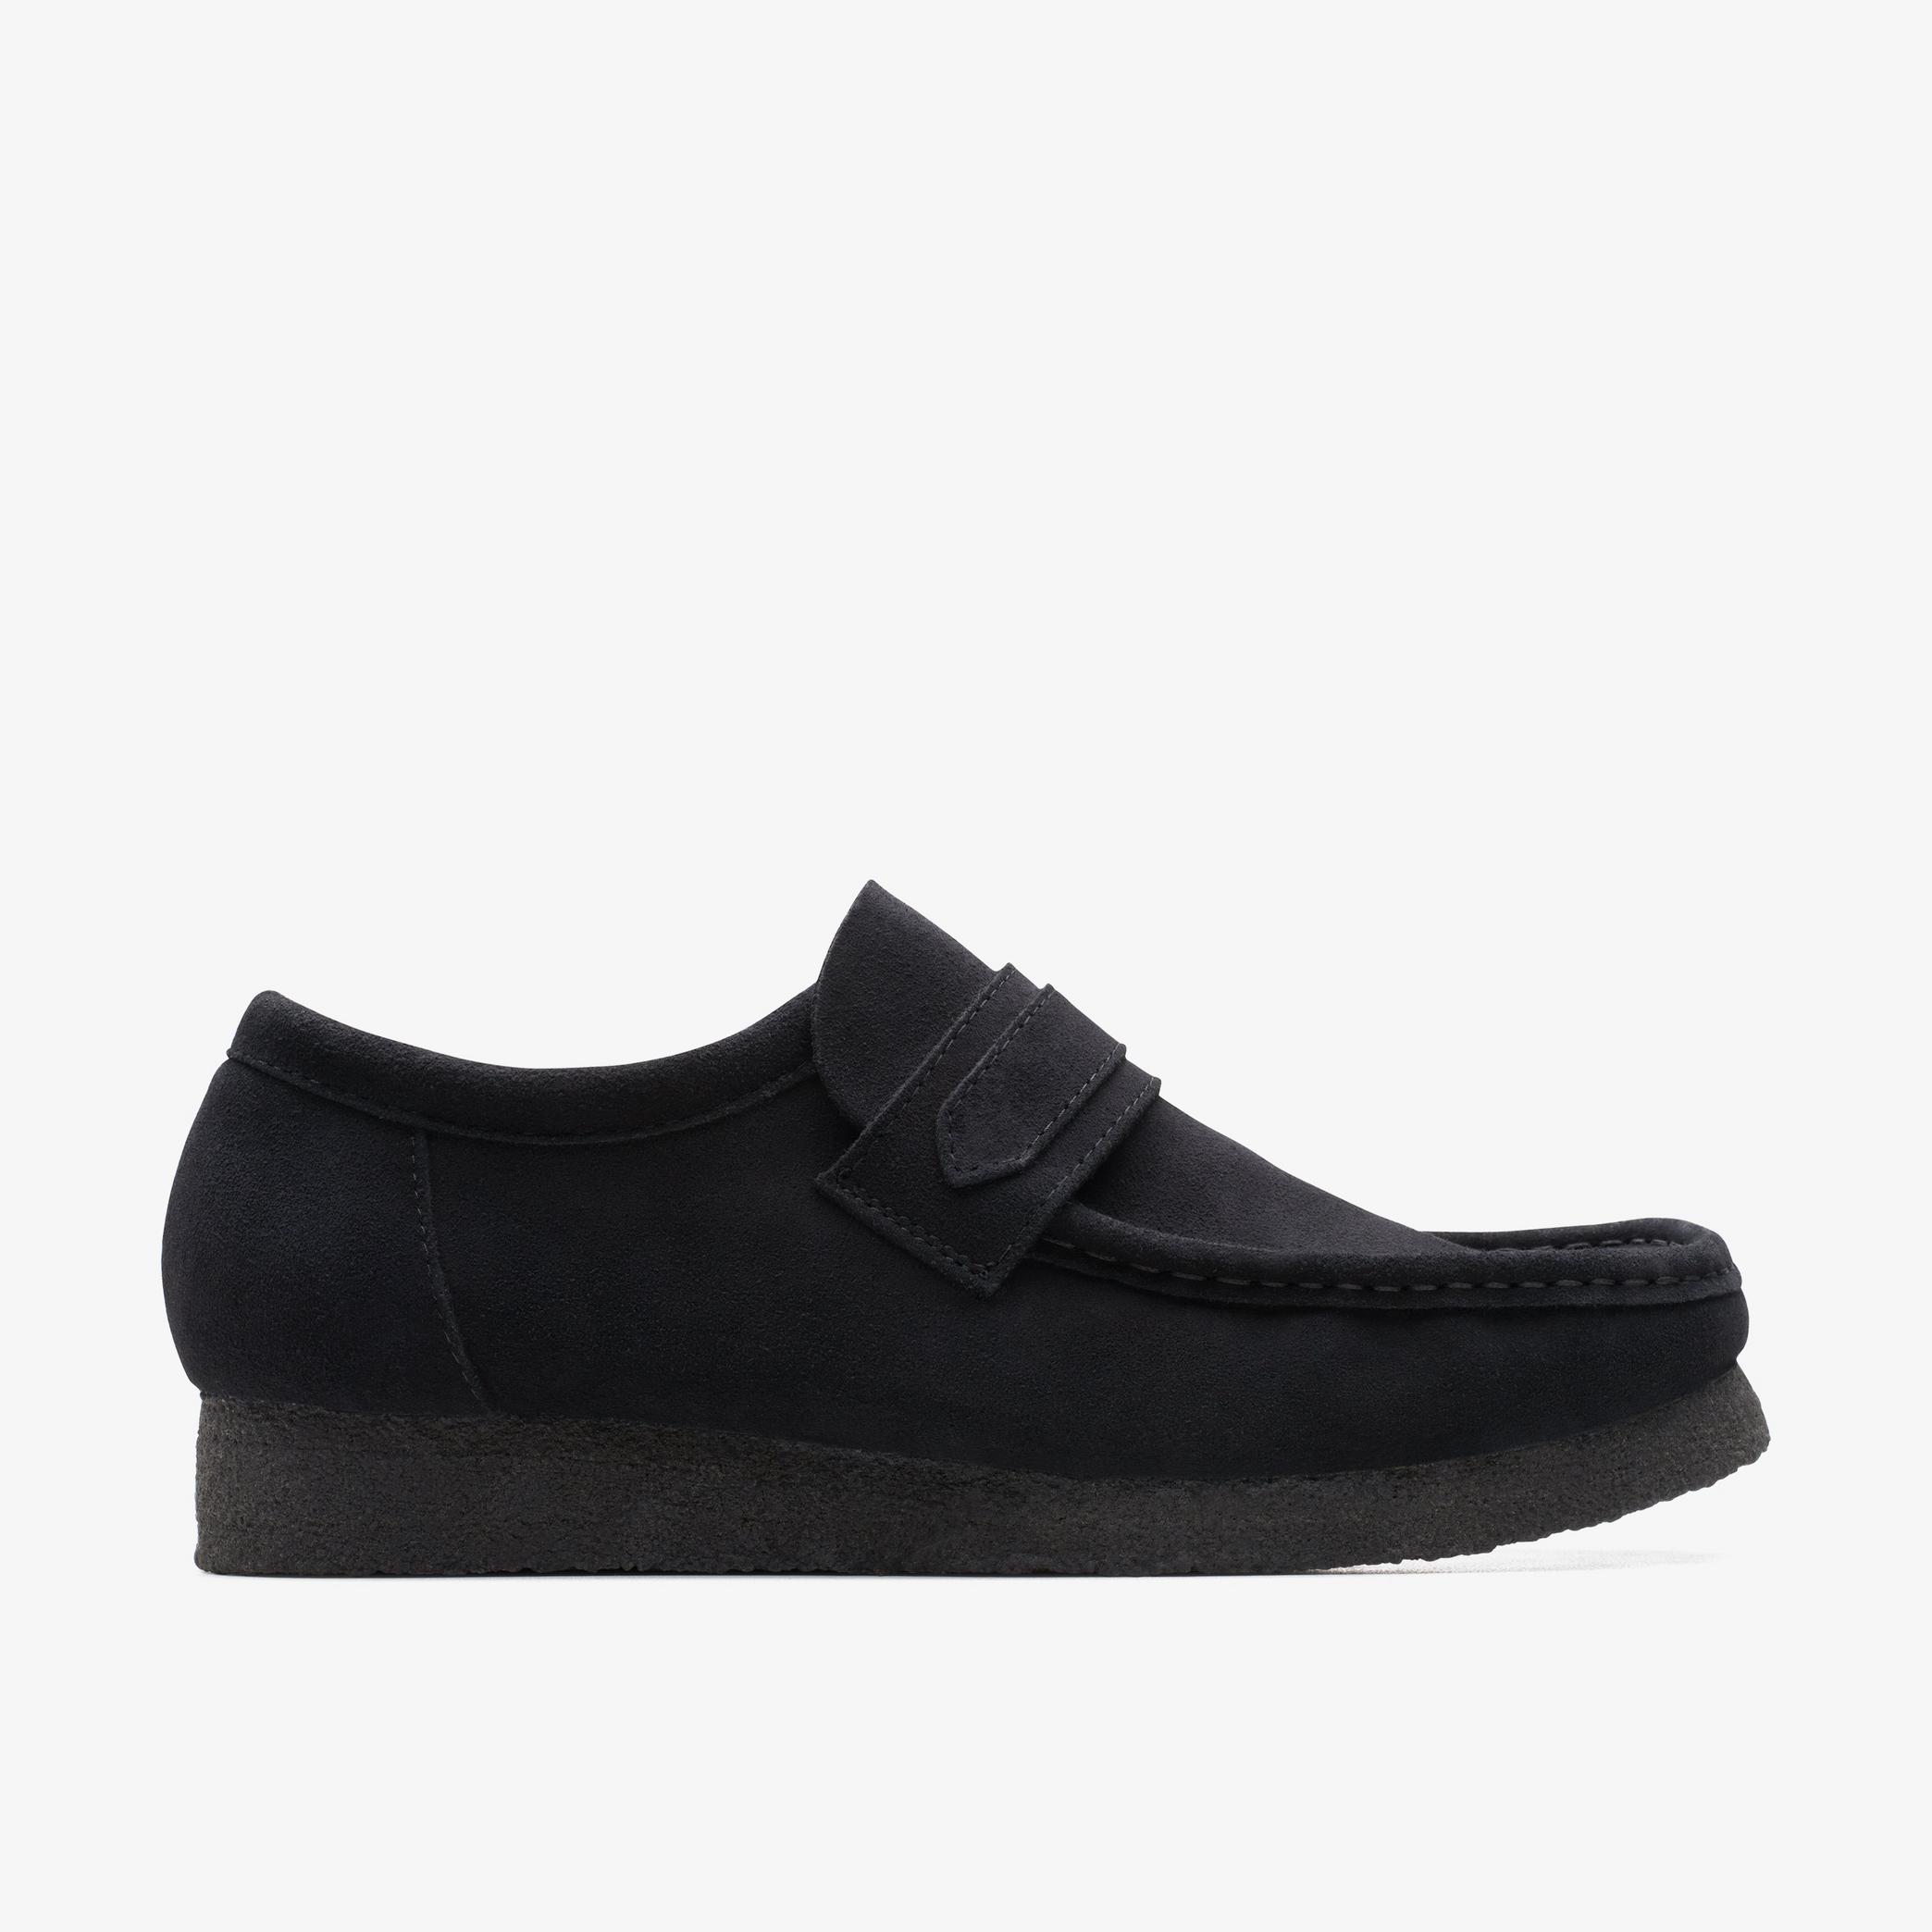 Wallabee Loafer Black Suede Loafers, view 1 of 6